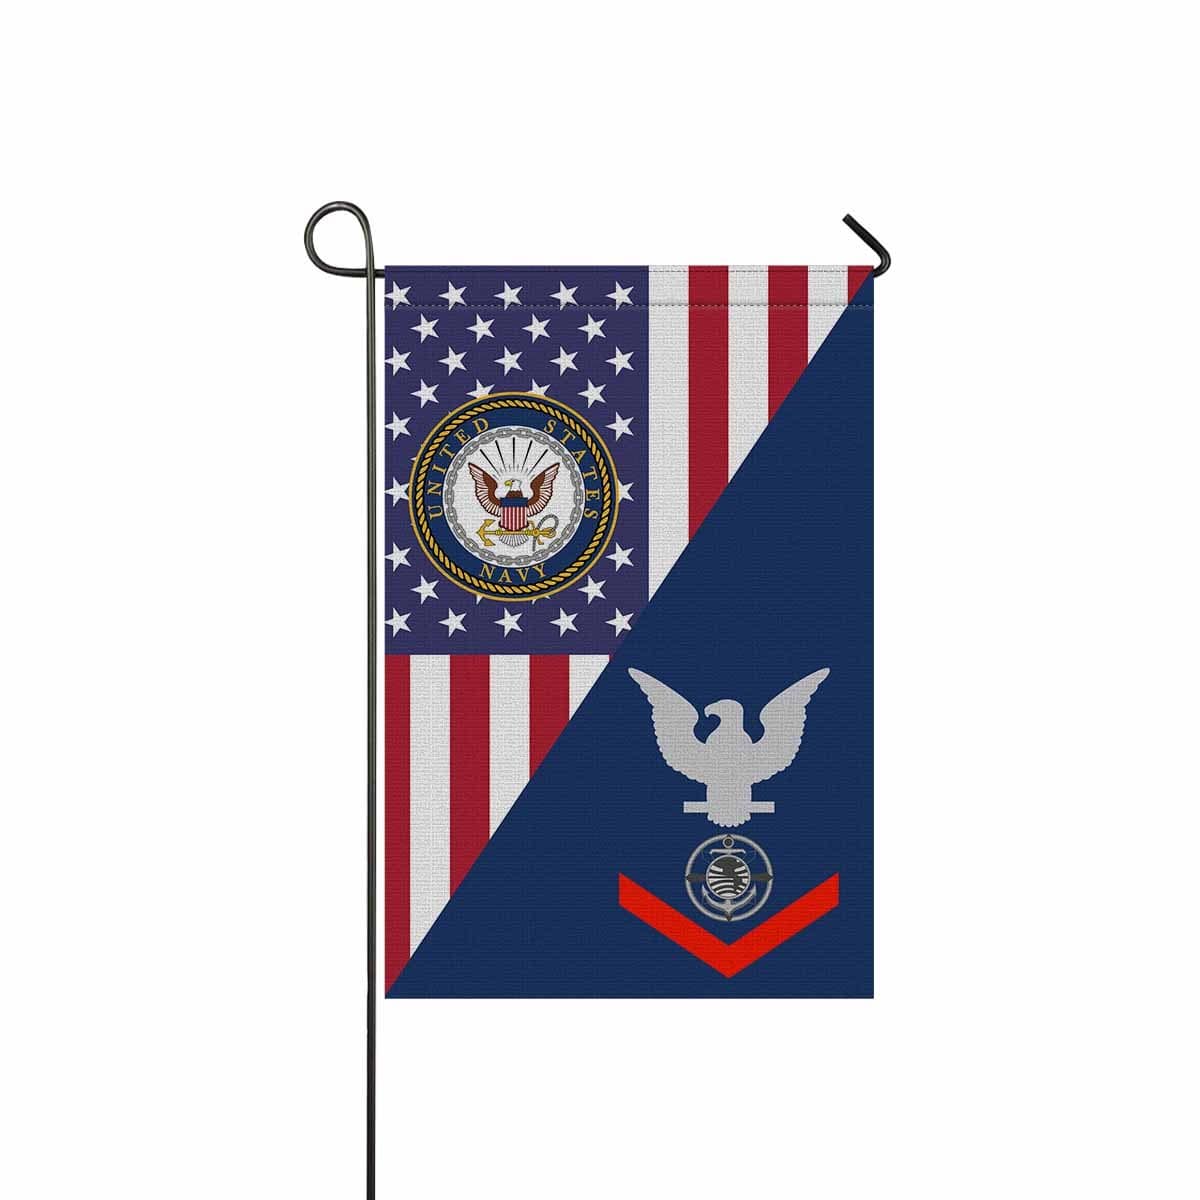 Navy Religious Program Specialist Navy RP E-4 Garden Flag/Yard Flag 12 inches x 18 inches Twin-Side Printing-GDFlag-Navy-Rating-Veterans Nation